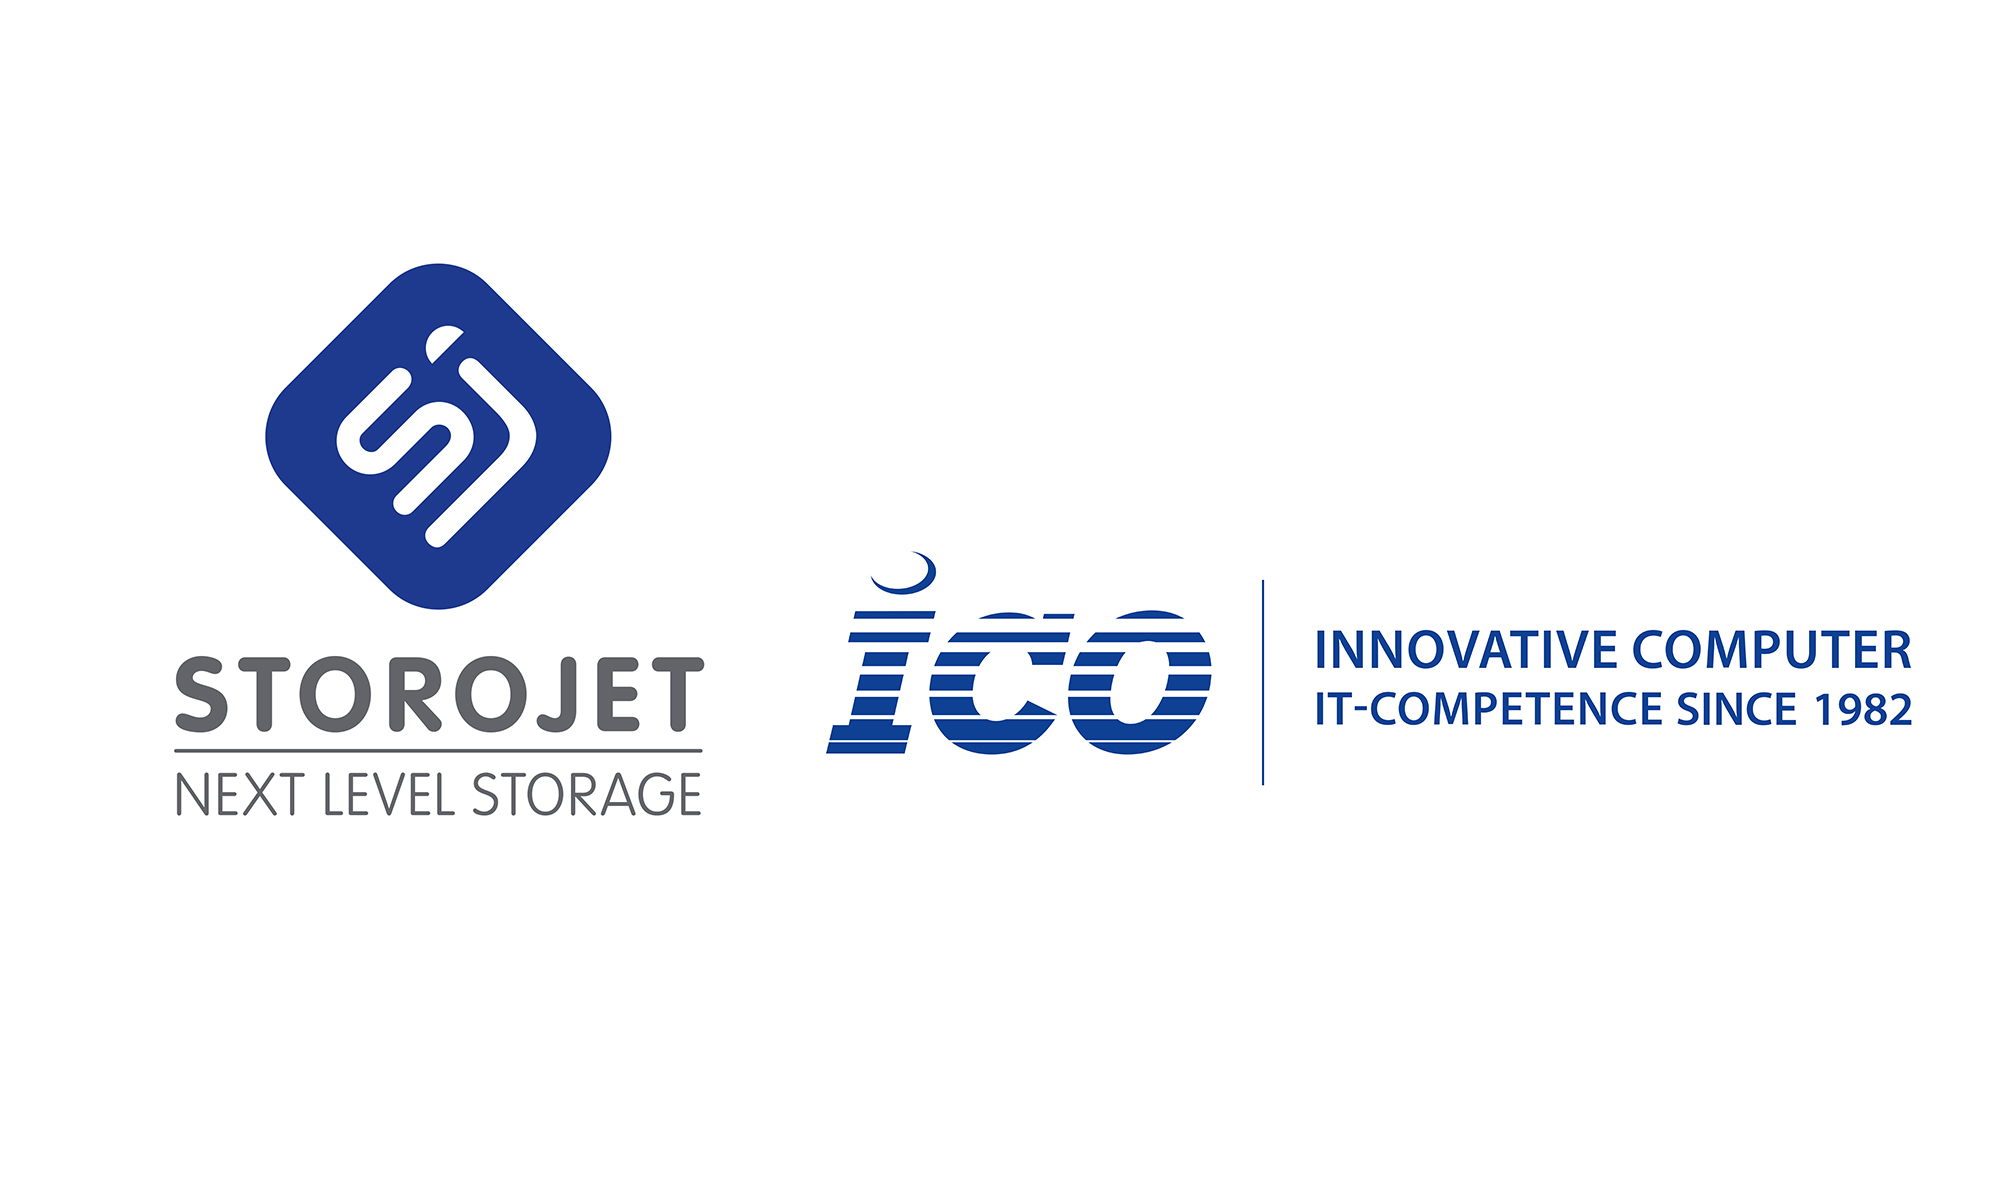 STOROJET: Now even more storage capacity thanks to optimized software